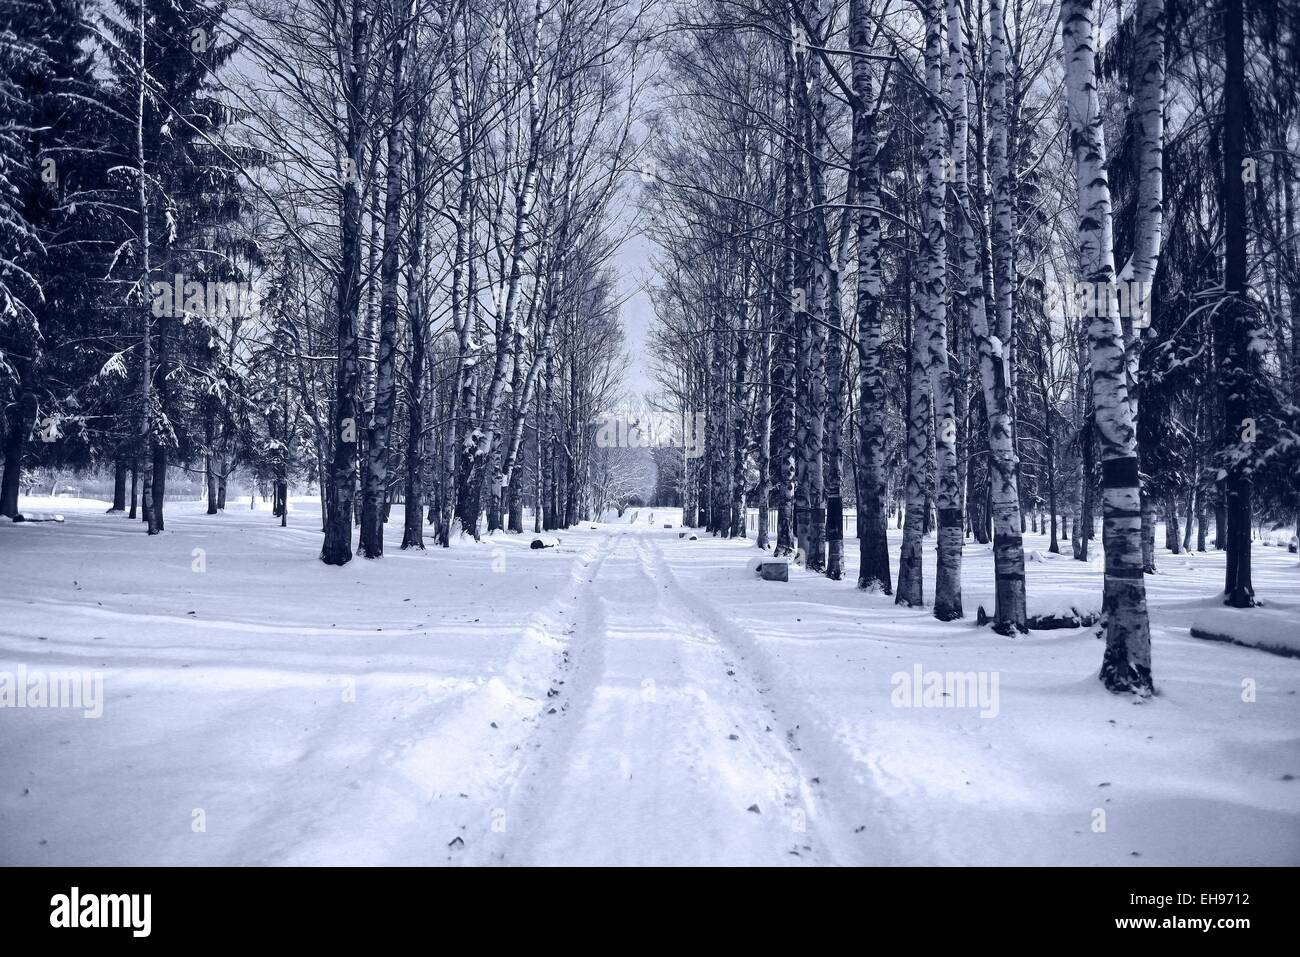 Winter road in snowy forest landscape Stock Photo